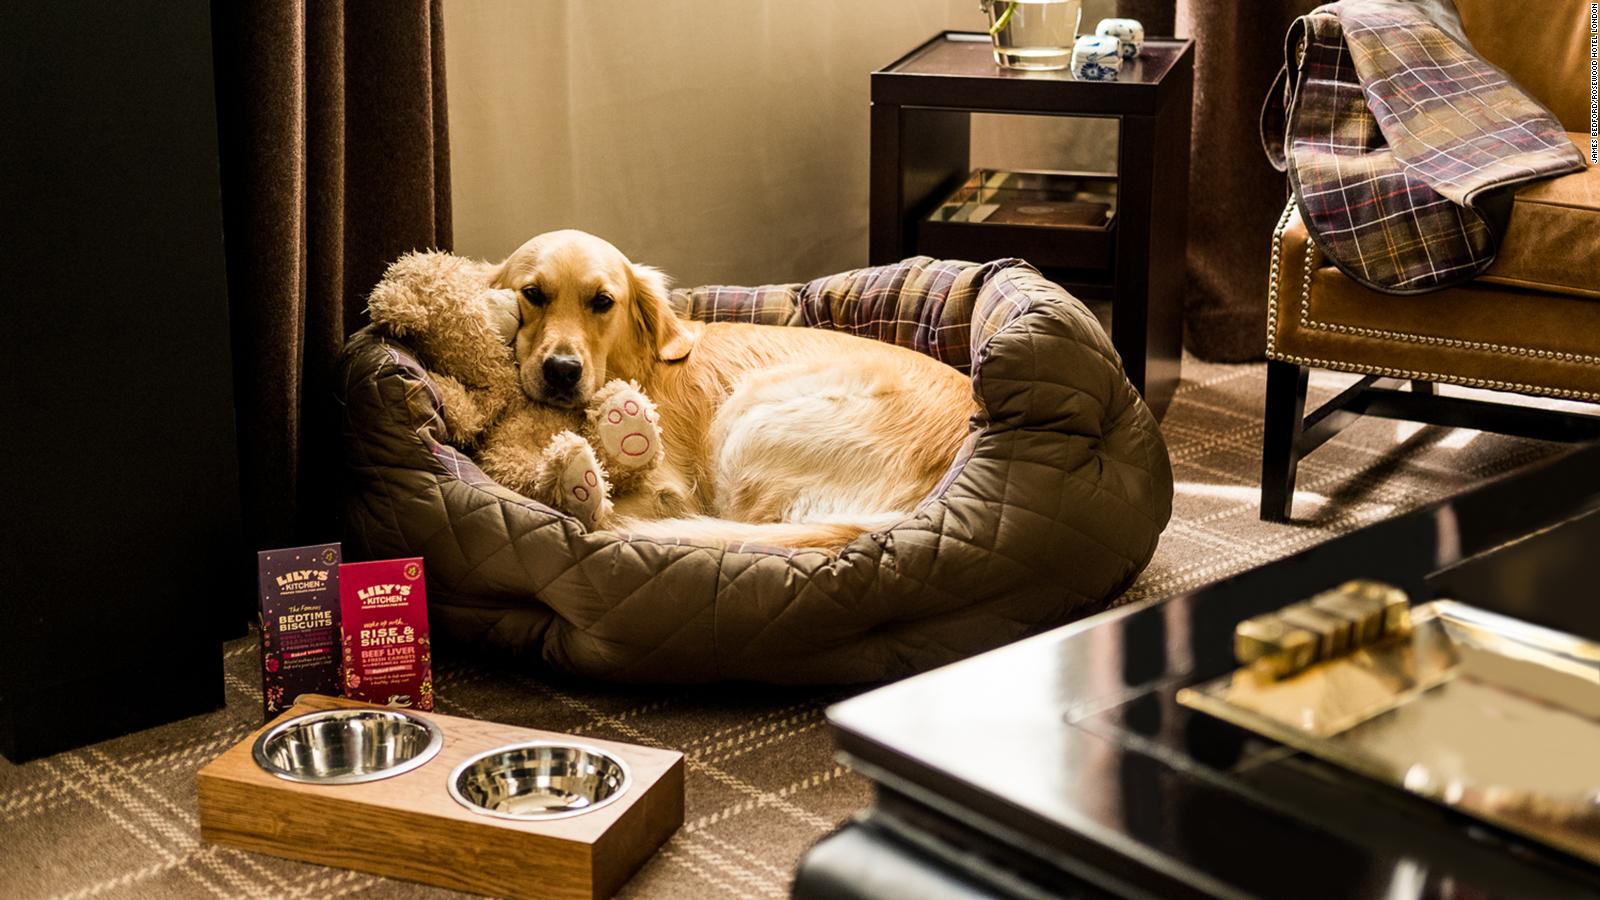 Pet-friendly hotels: 13 of the best 